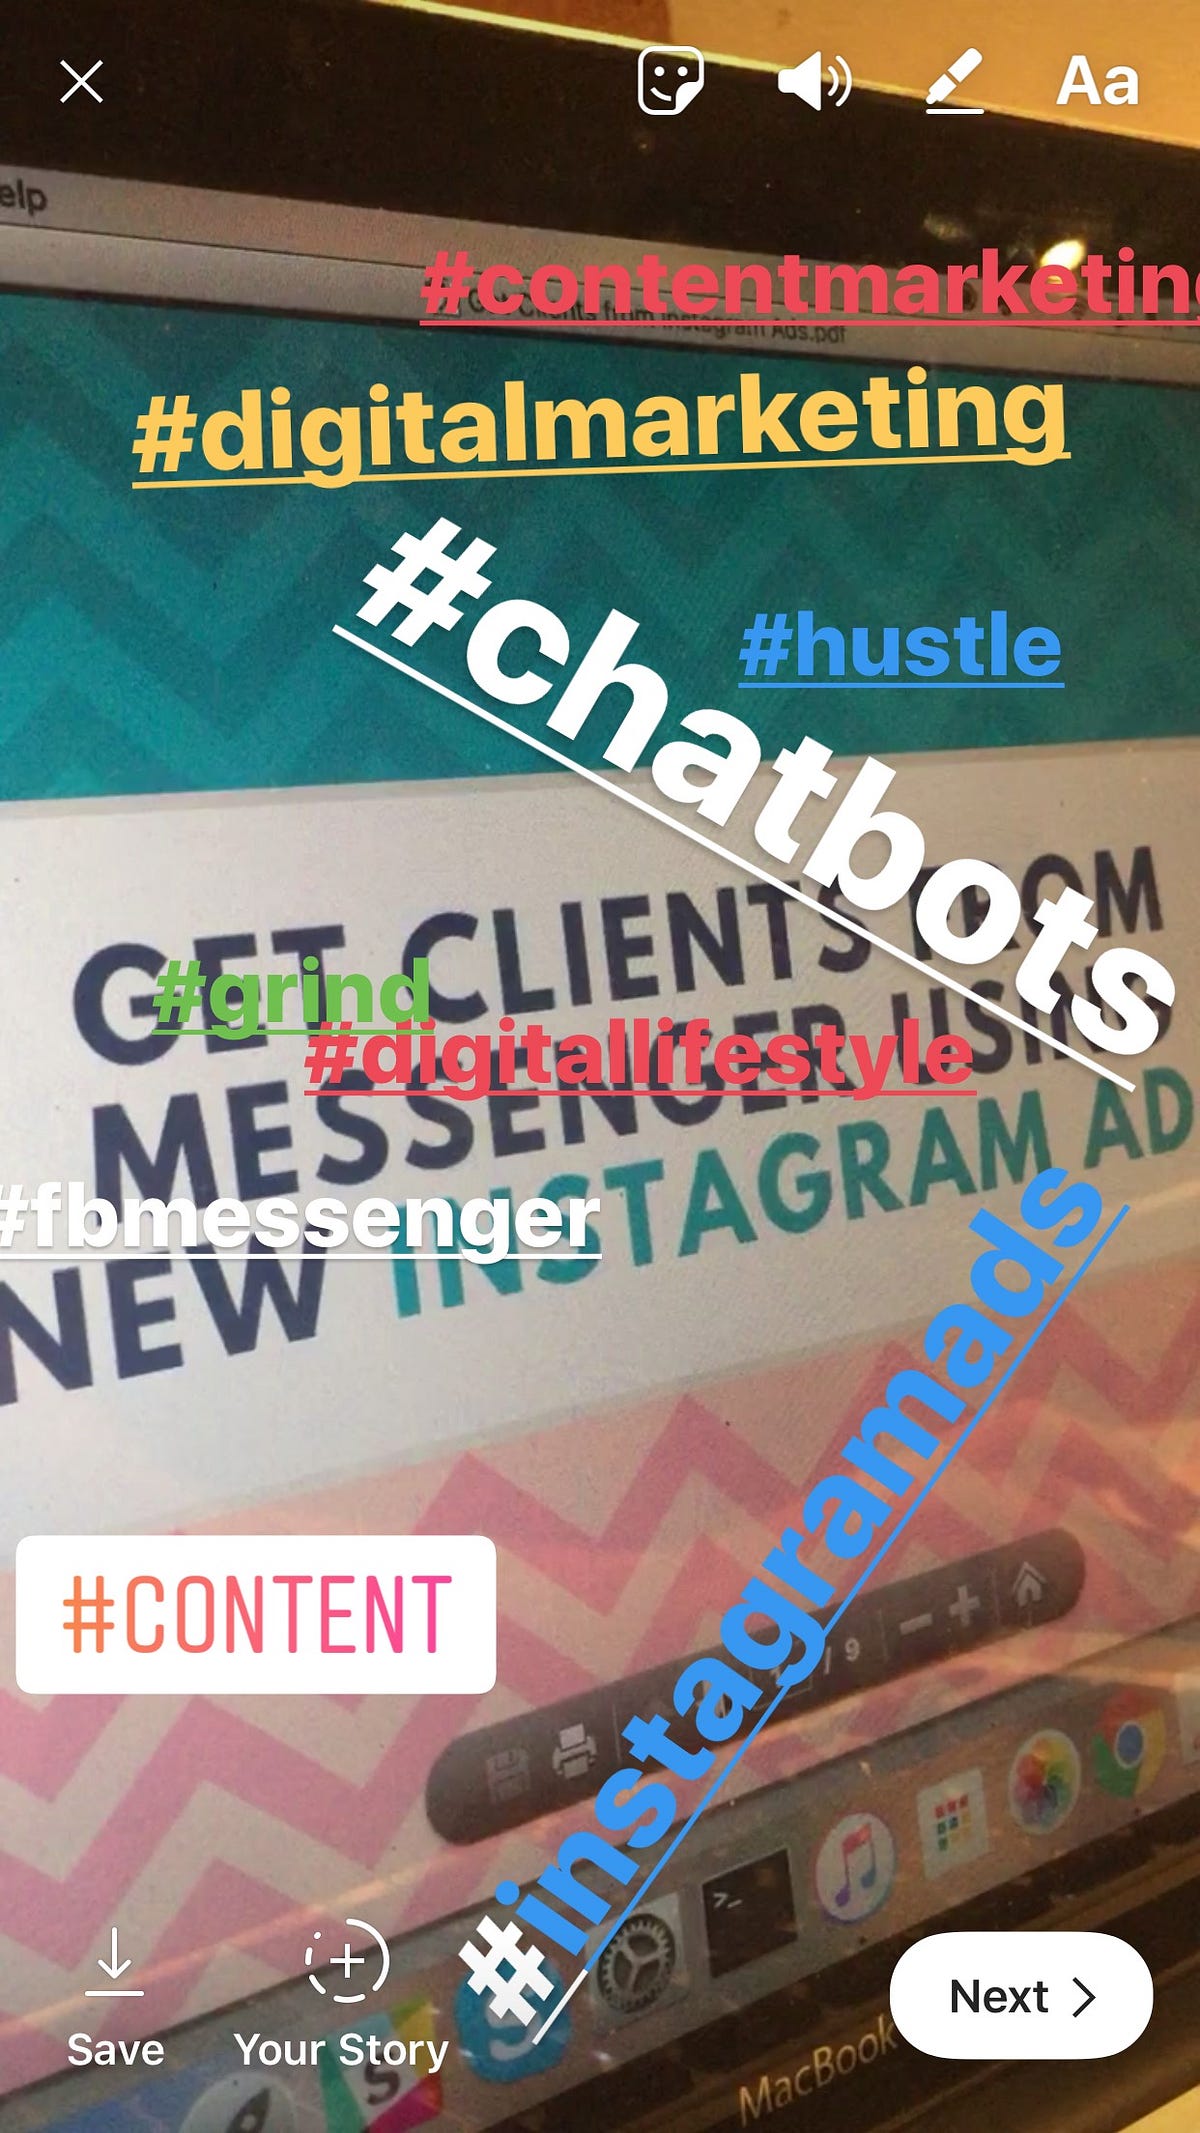 hidden hashtag hack for instagram stories - i dont see the o!   ption to follow hashtags in instagram